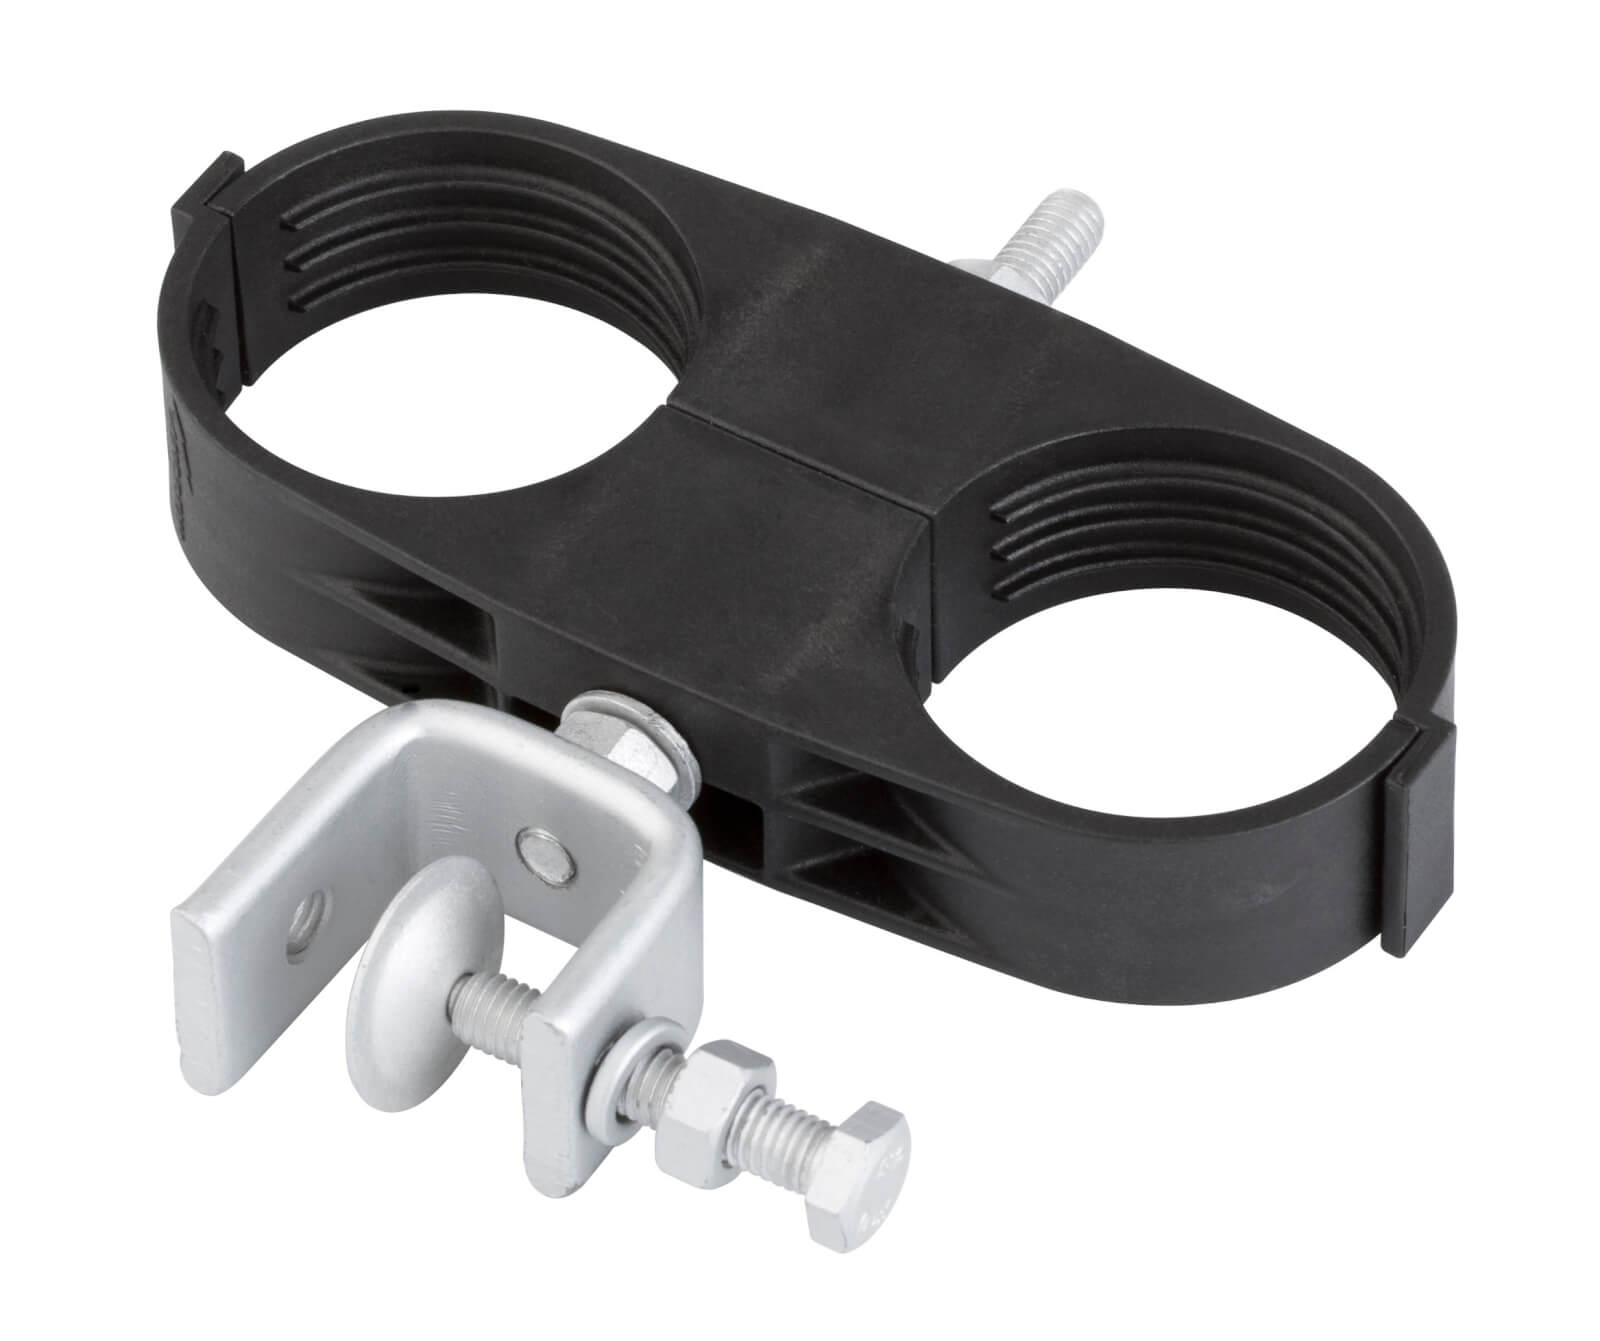 Original Image: CommScope – Double Hanger Kit for 1-5/8 in coaxial cable, single stack; includes hardware and angle adapter